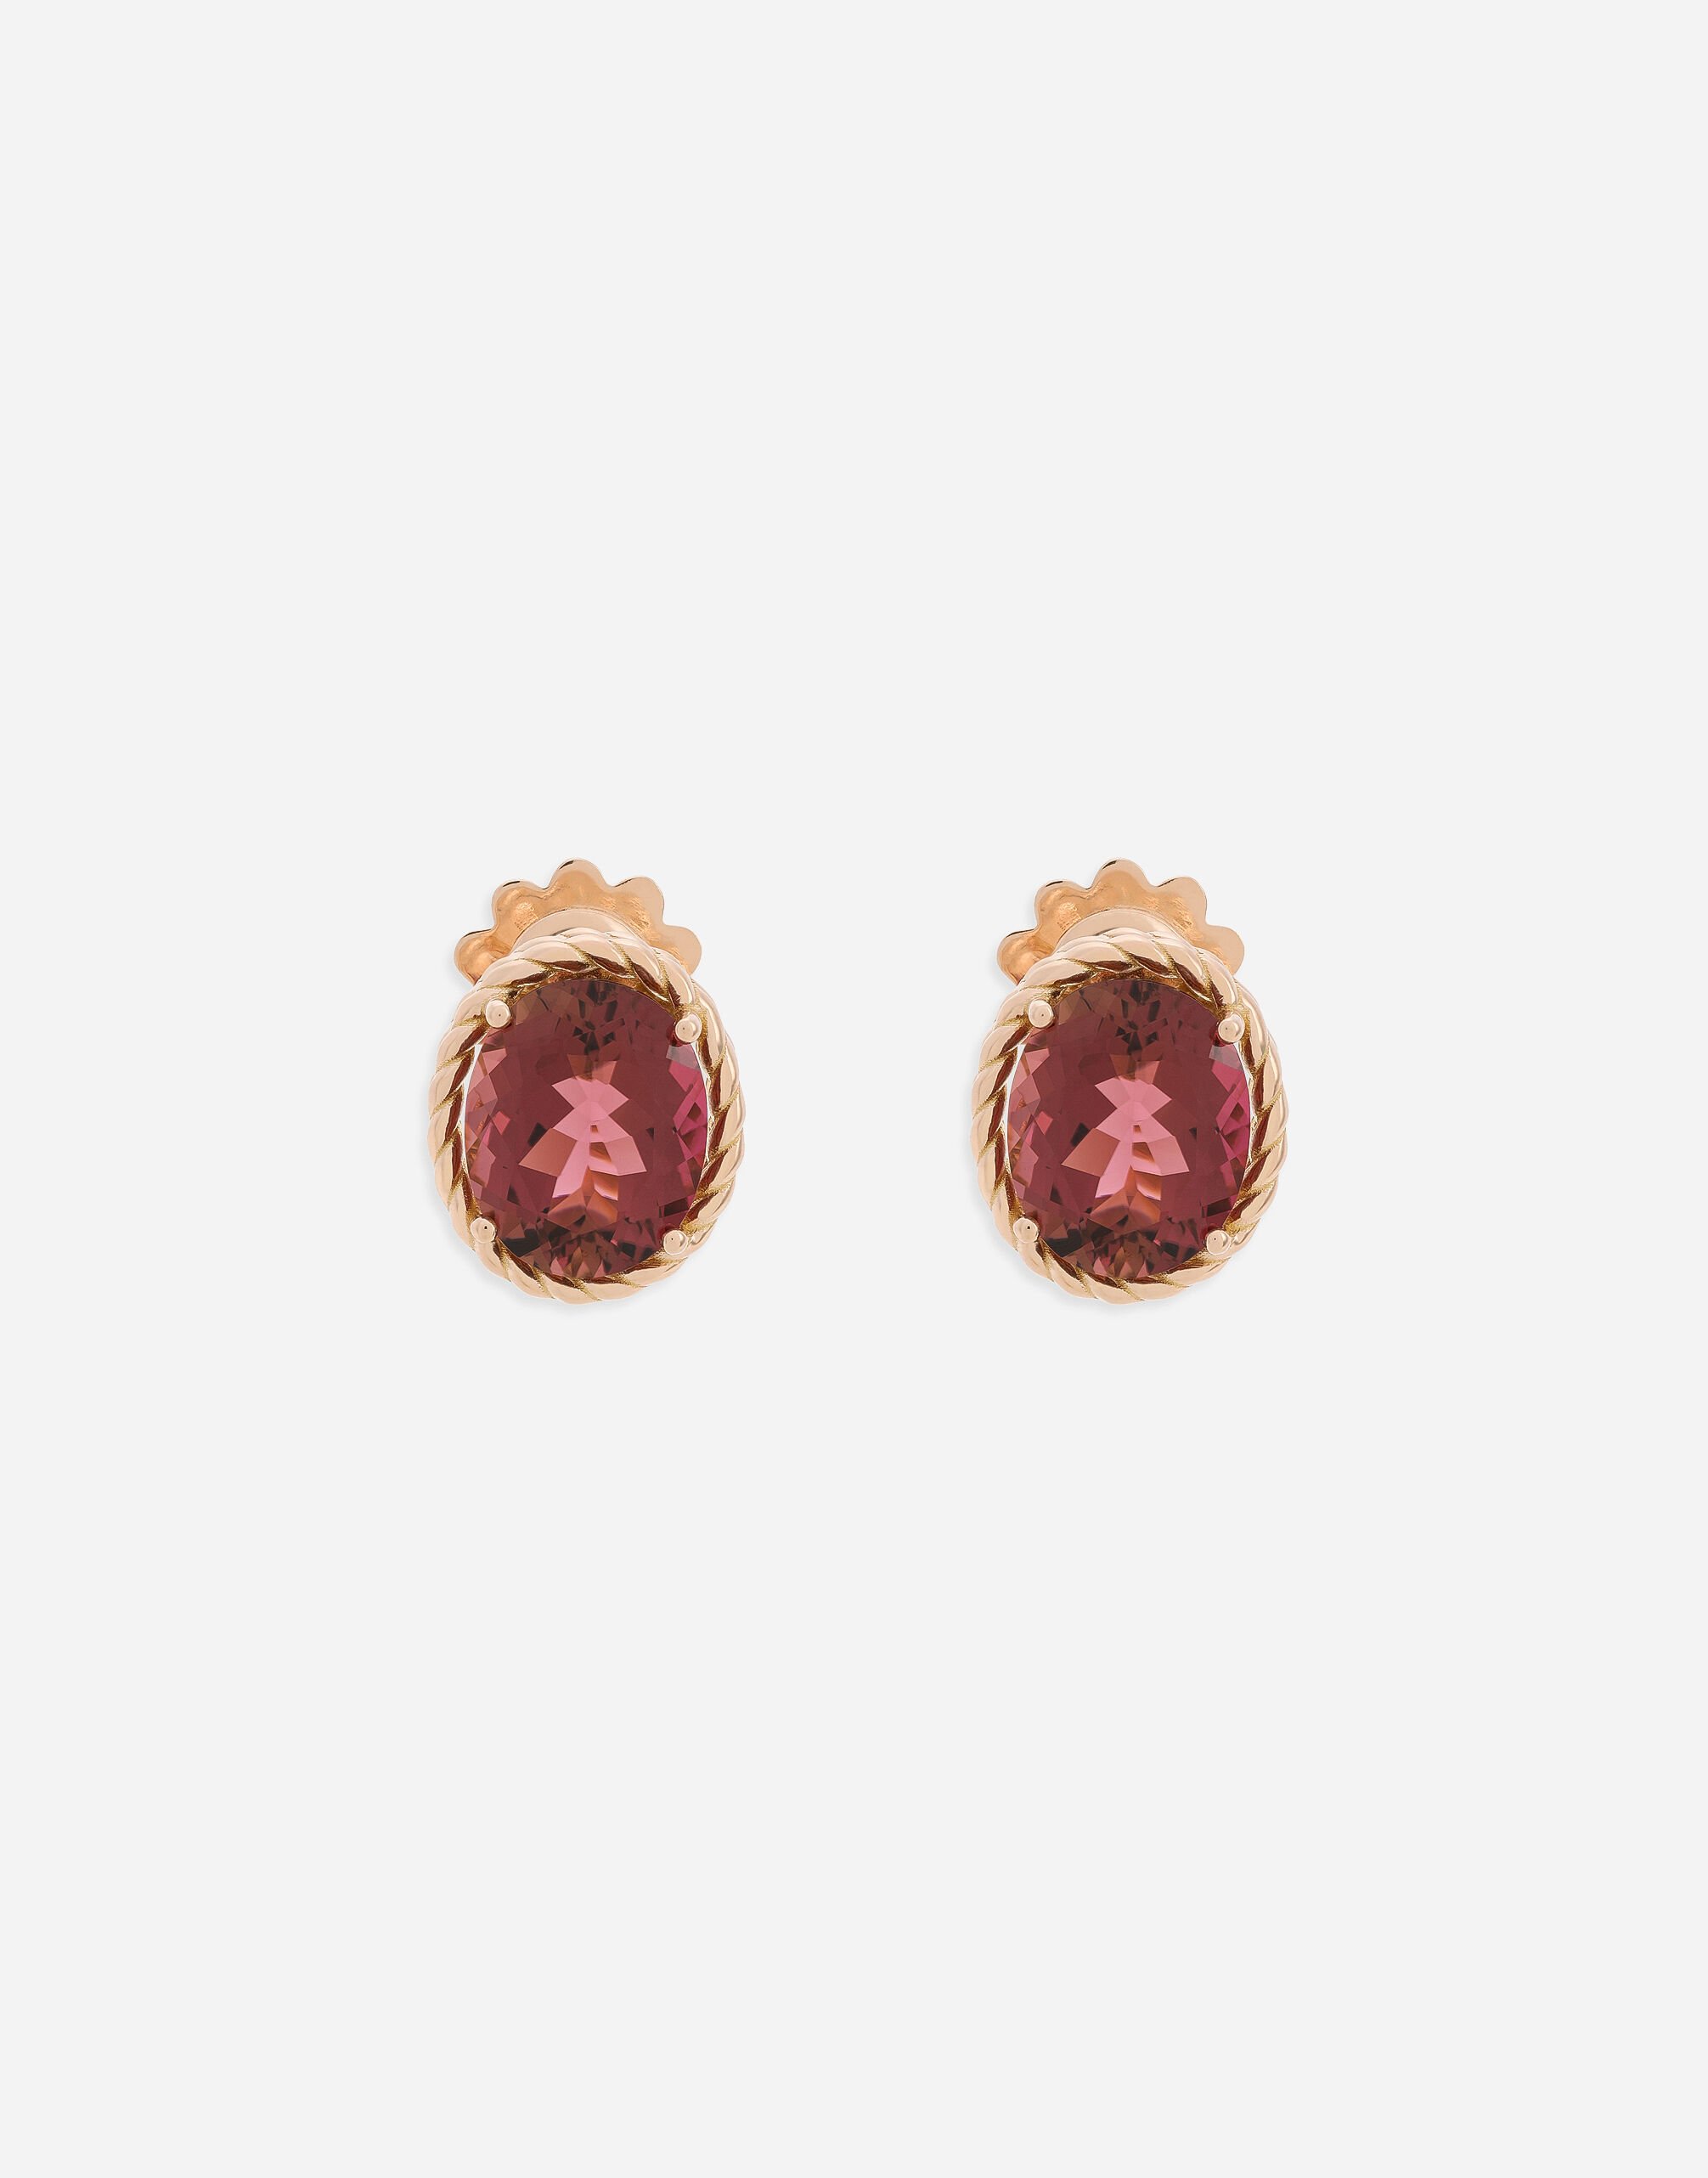 Dolce & Gabbana Anna earrings in red gold 18kt with toumalines White WSQB1GWSPBL